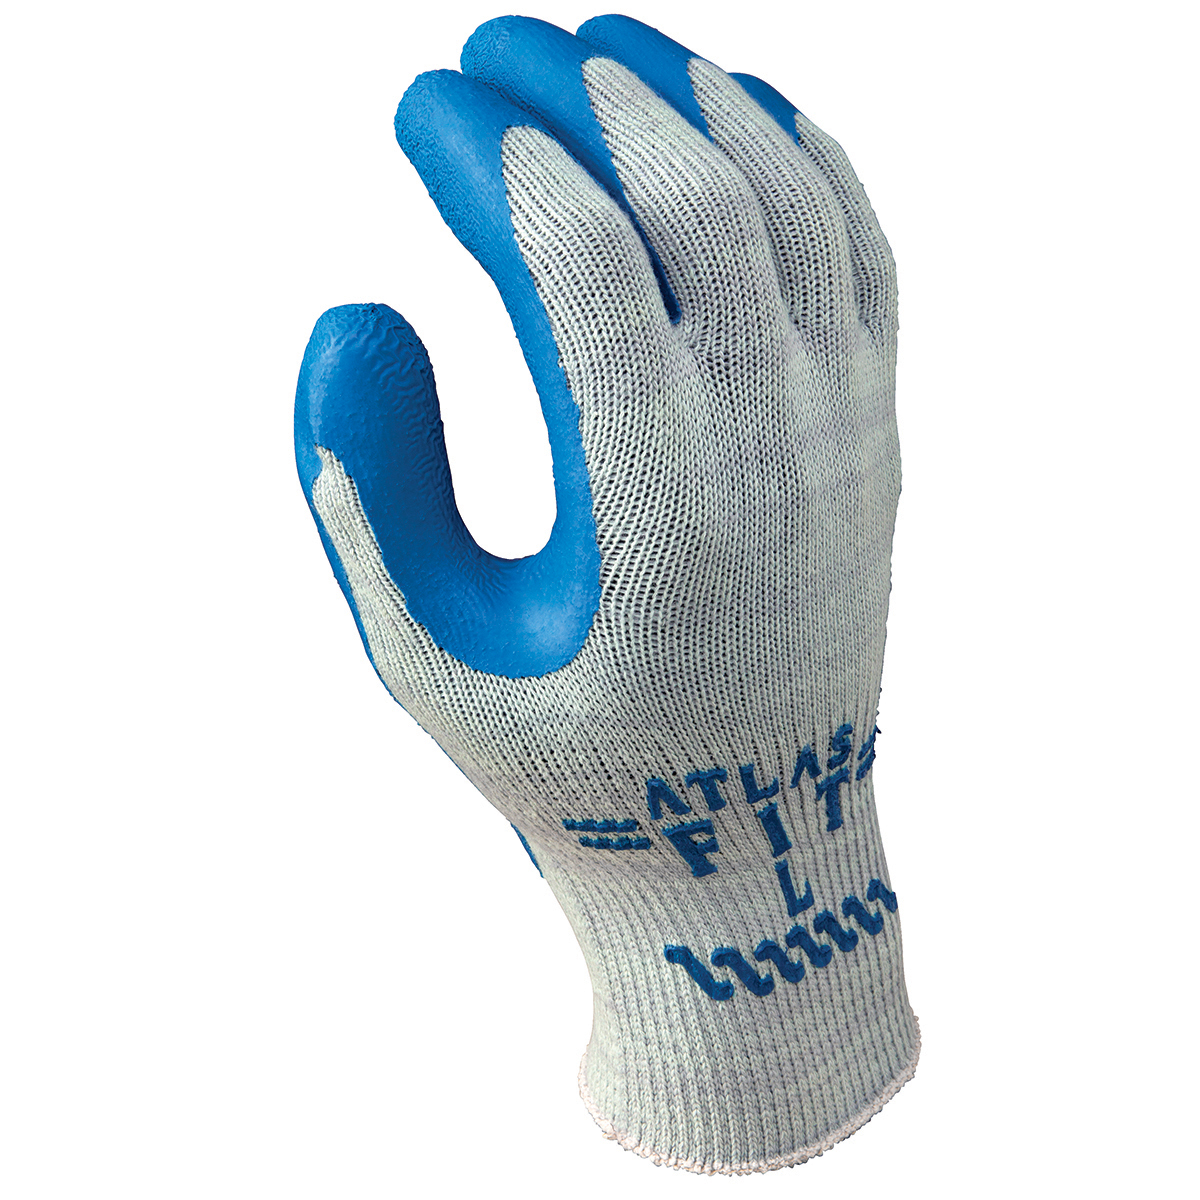 SHOWA® Size 11 10 Gauge Natural Rubber Palm Coated Work Gloves With Cotton And Polyester Liner And Knit Wrist